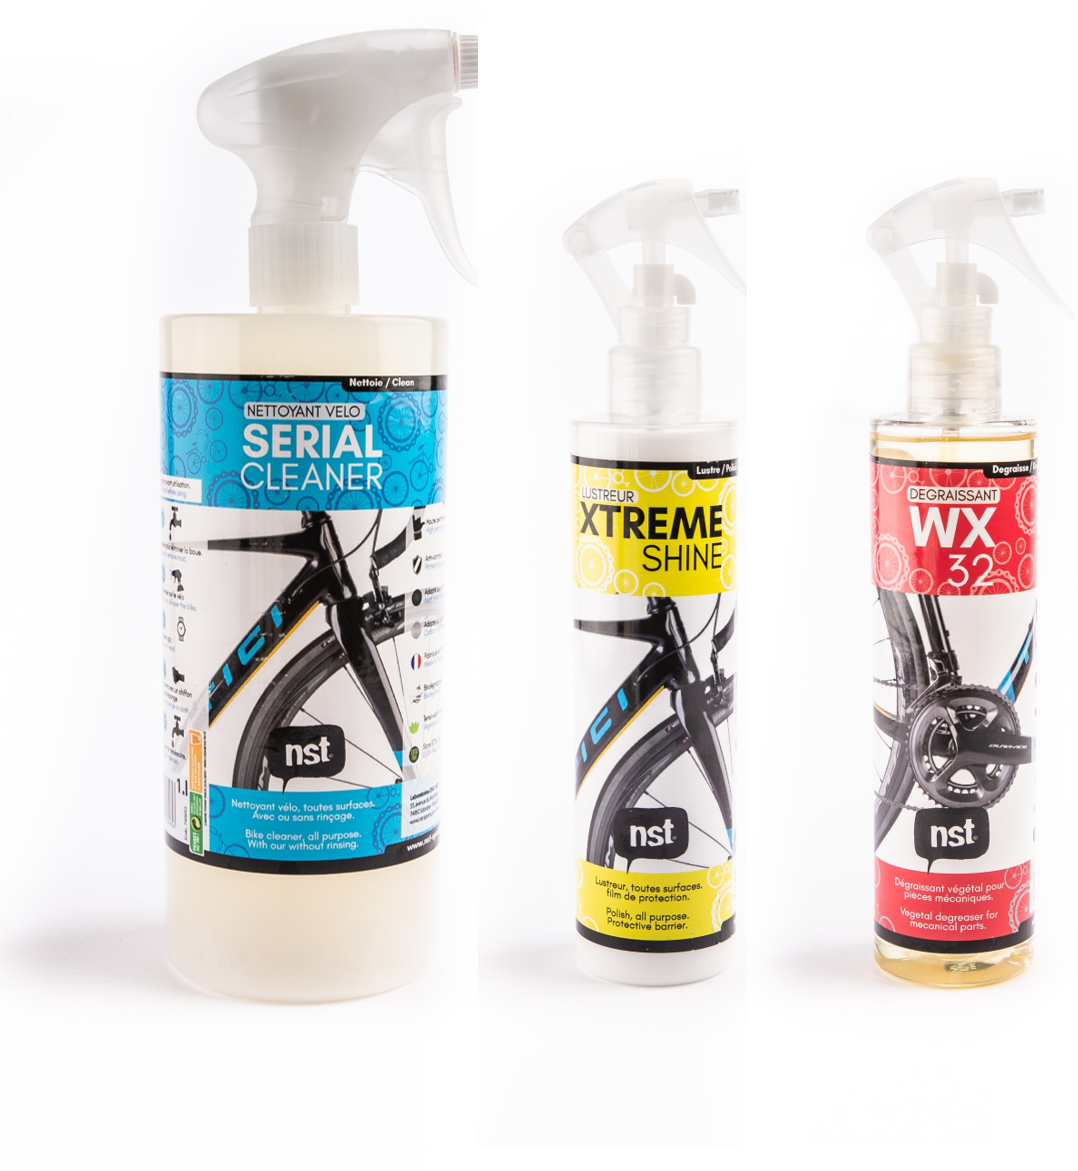 NST Serial Cleaner + WX32 + Xtreme Shine - Kit manutenzione bici